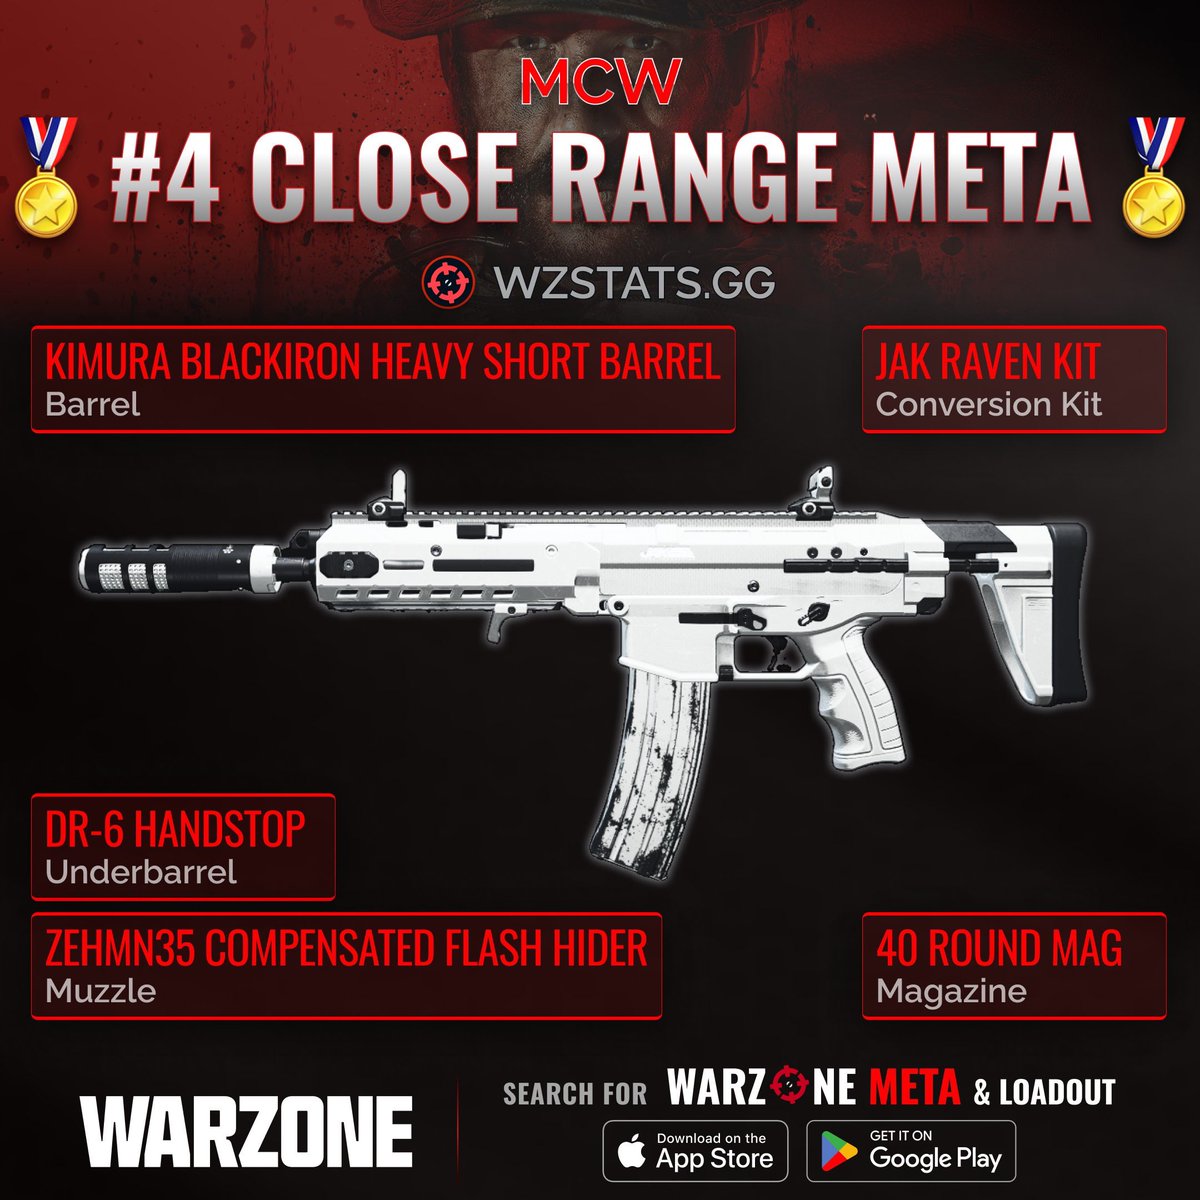 ‼️🚨 WARZONE META: CLOSE RANGE 🚨‼️

👑 These are the Top 4 Close Range Meta Loadouts in #Warzone right now!

🥇 HRM-9: Most Dominant/Consitent
🥈 Striker 9: Fast TTK at all ranges
🥉 BP50: Fast TTK & High Mobility (🔻Bad Damage Drop-off)
4️⃣ MCW: Fast TTK(🔻Inconsistent🔻Bad STF)…